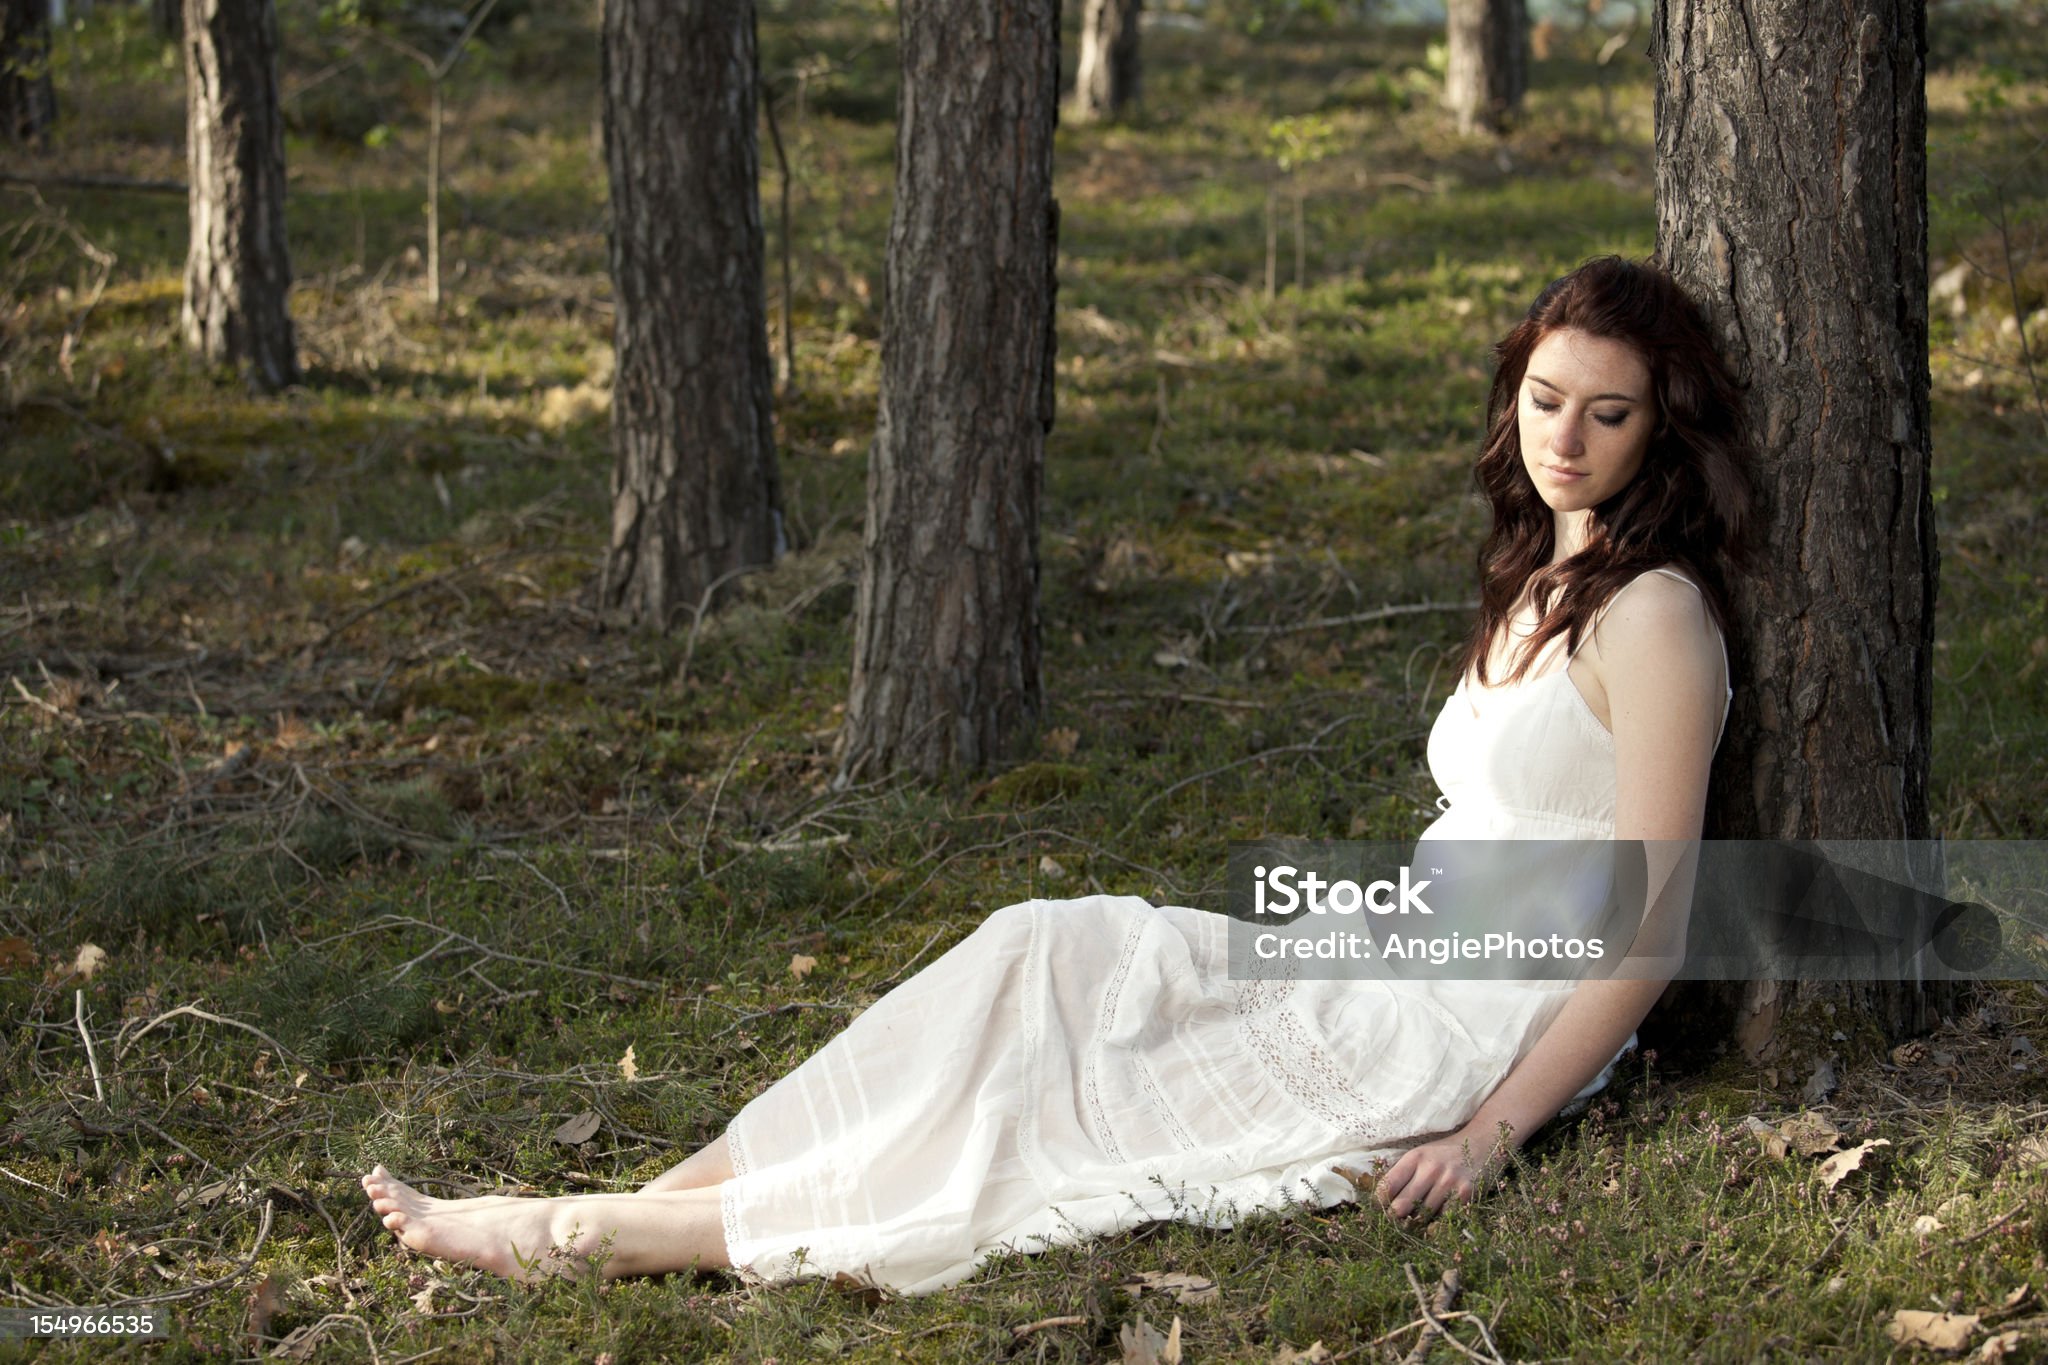 https://media.istockphoto.com/id/154966535/photo/young-woman-relaxing-in-the-forest.jpg?s=2048x2048&amp;w=is&amp;k=20&amp;c=Sf0HtW5VecxGx2CnMkRC5BiTQb9VHr0838zV3CVzKMk=